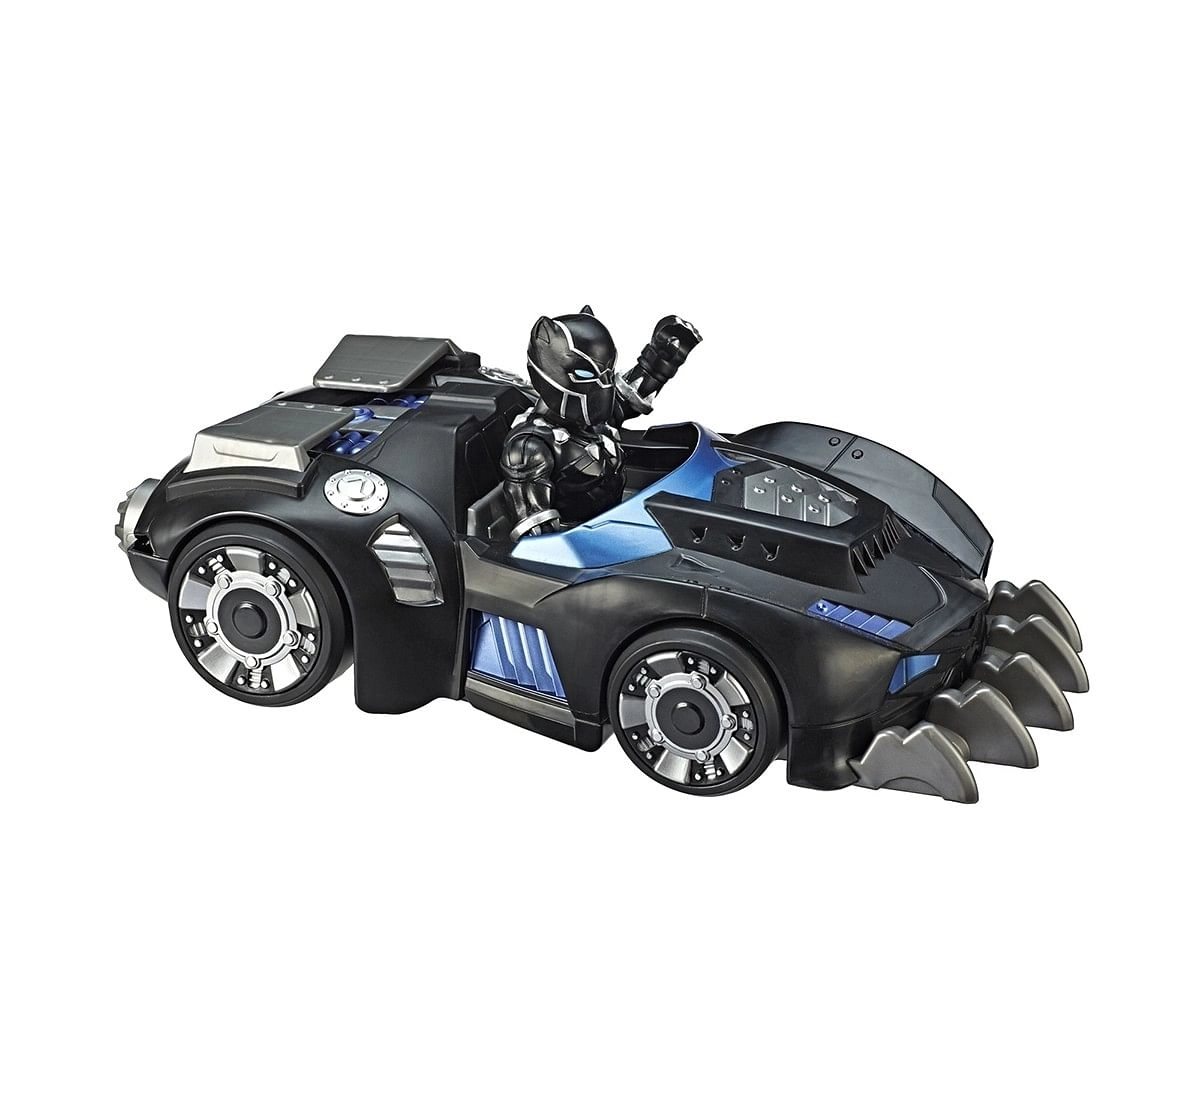 Superhero Adventure Black Panther Road Racer Assorted Activity Toys for Boys age 3Y+ (Black)